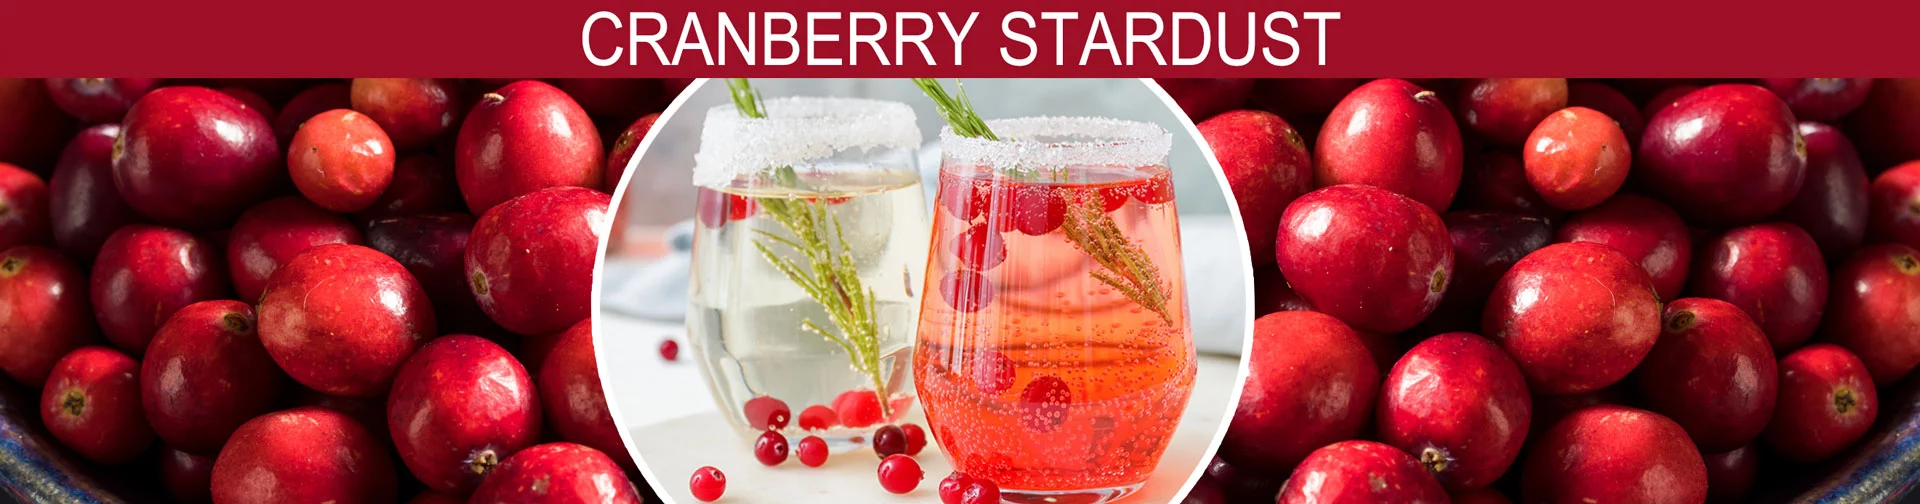 Banner Image of a crisp scent of fresh harvested cranberries. Rolled in Glitter.